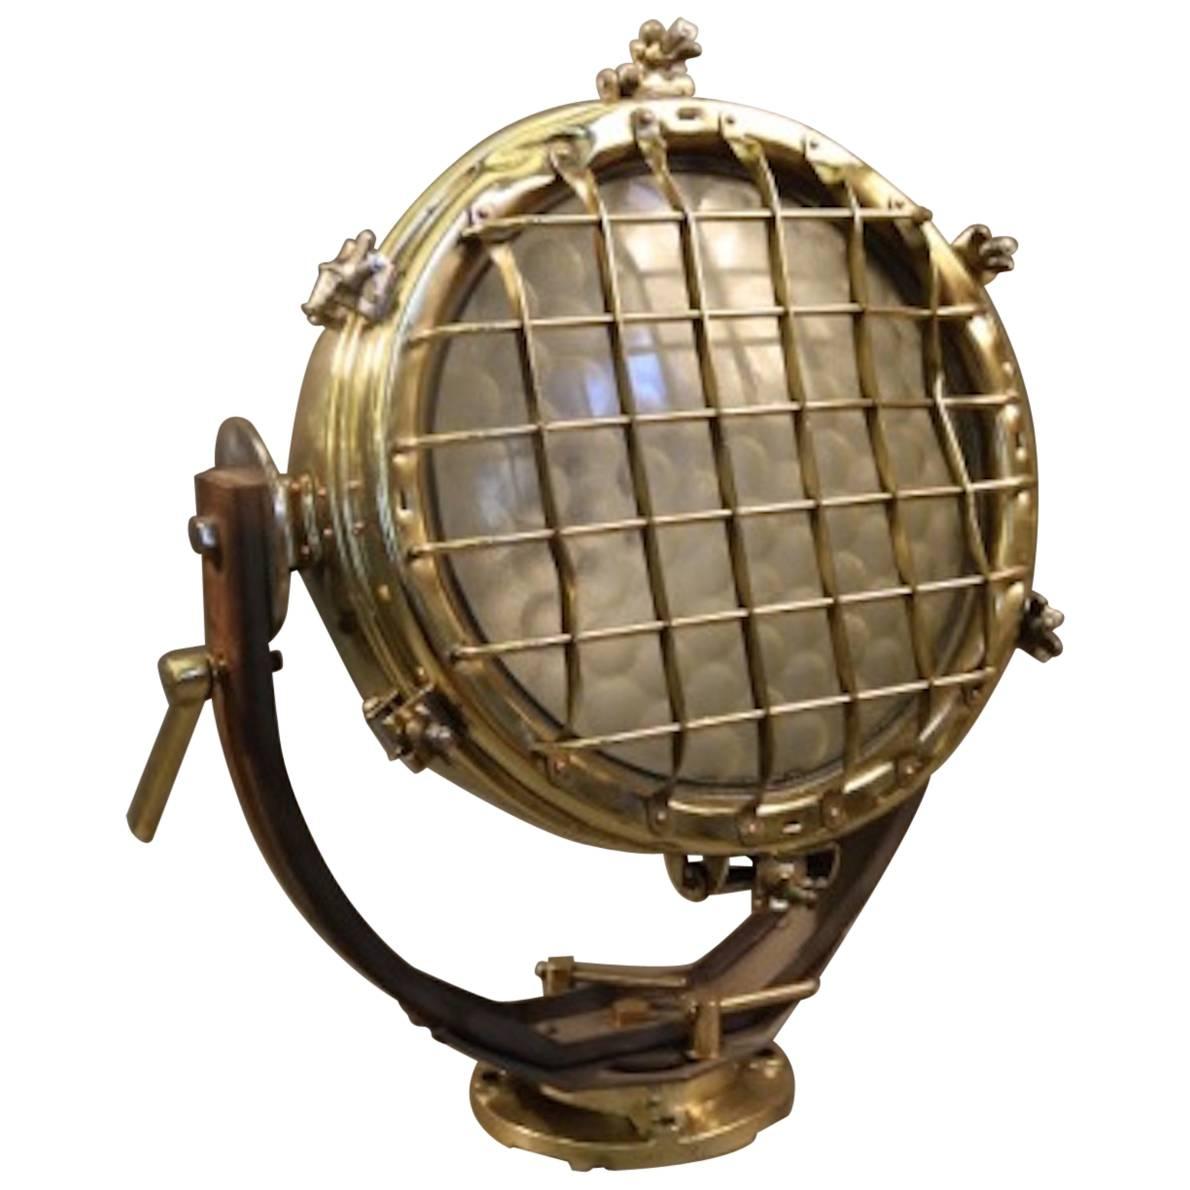 Ship's Cargo Floodlight of Solid Brass